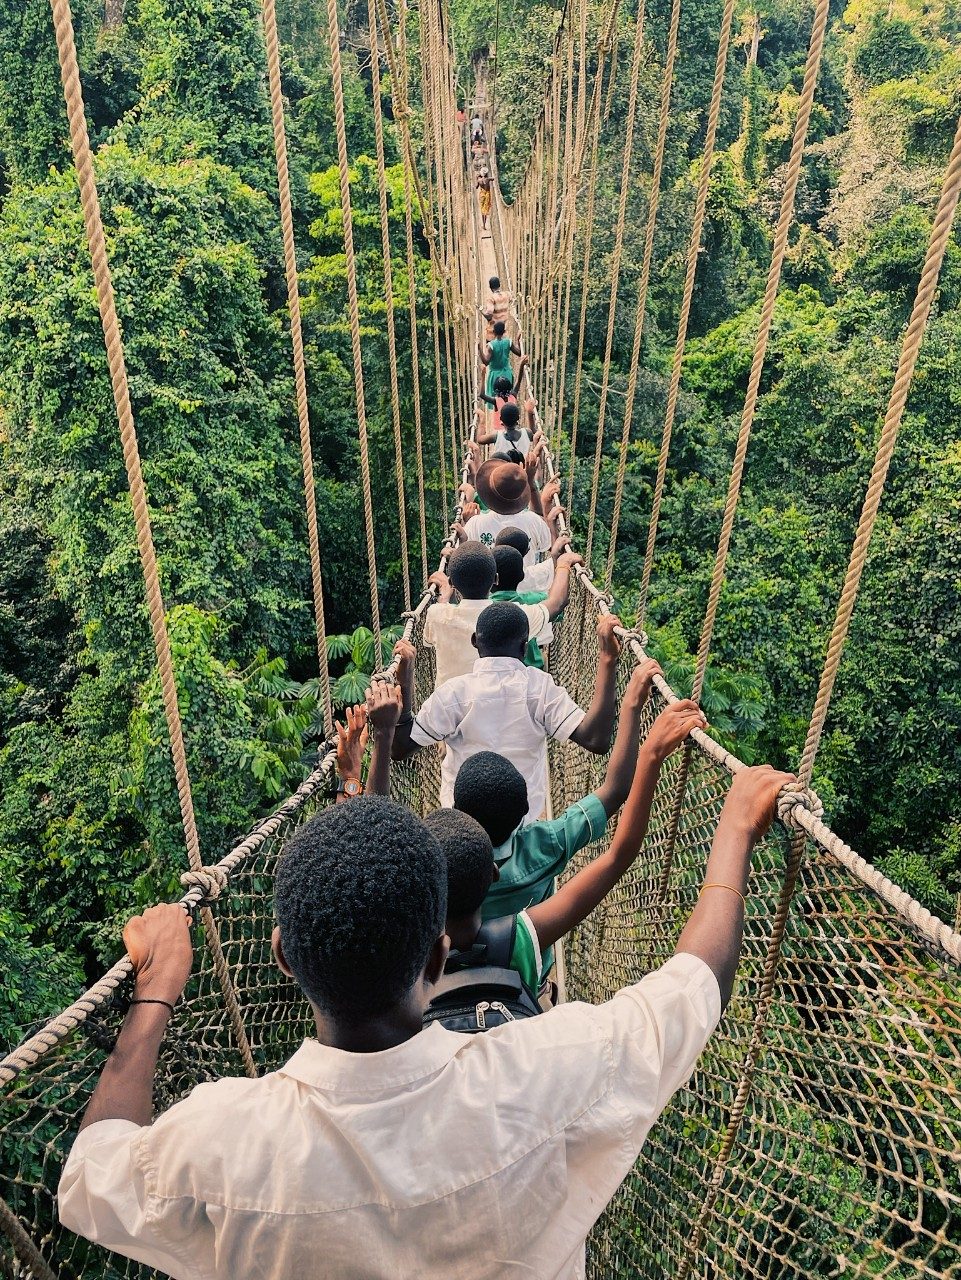 Students crossing a swinging bridge during a field trip.